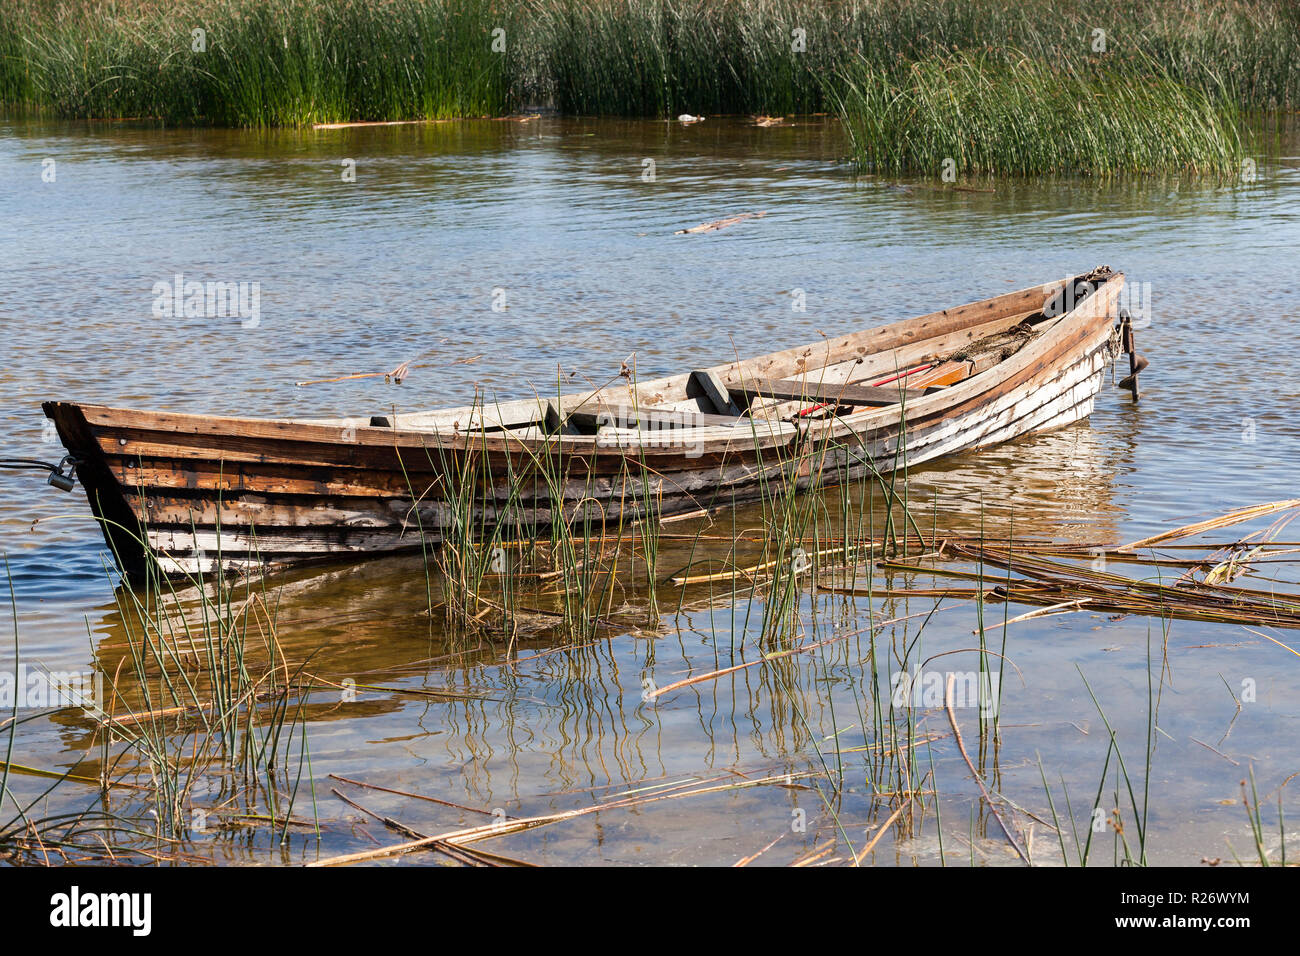 https://c8.alamy.com/comp/R26WYM/old-wooden-boat-near-the-lake-used-by-local-people-for-fishing-boat-in-poor-condition-R26WYM.jpg